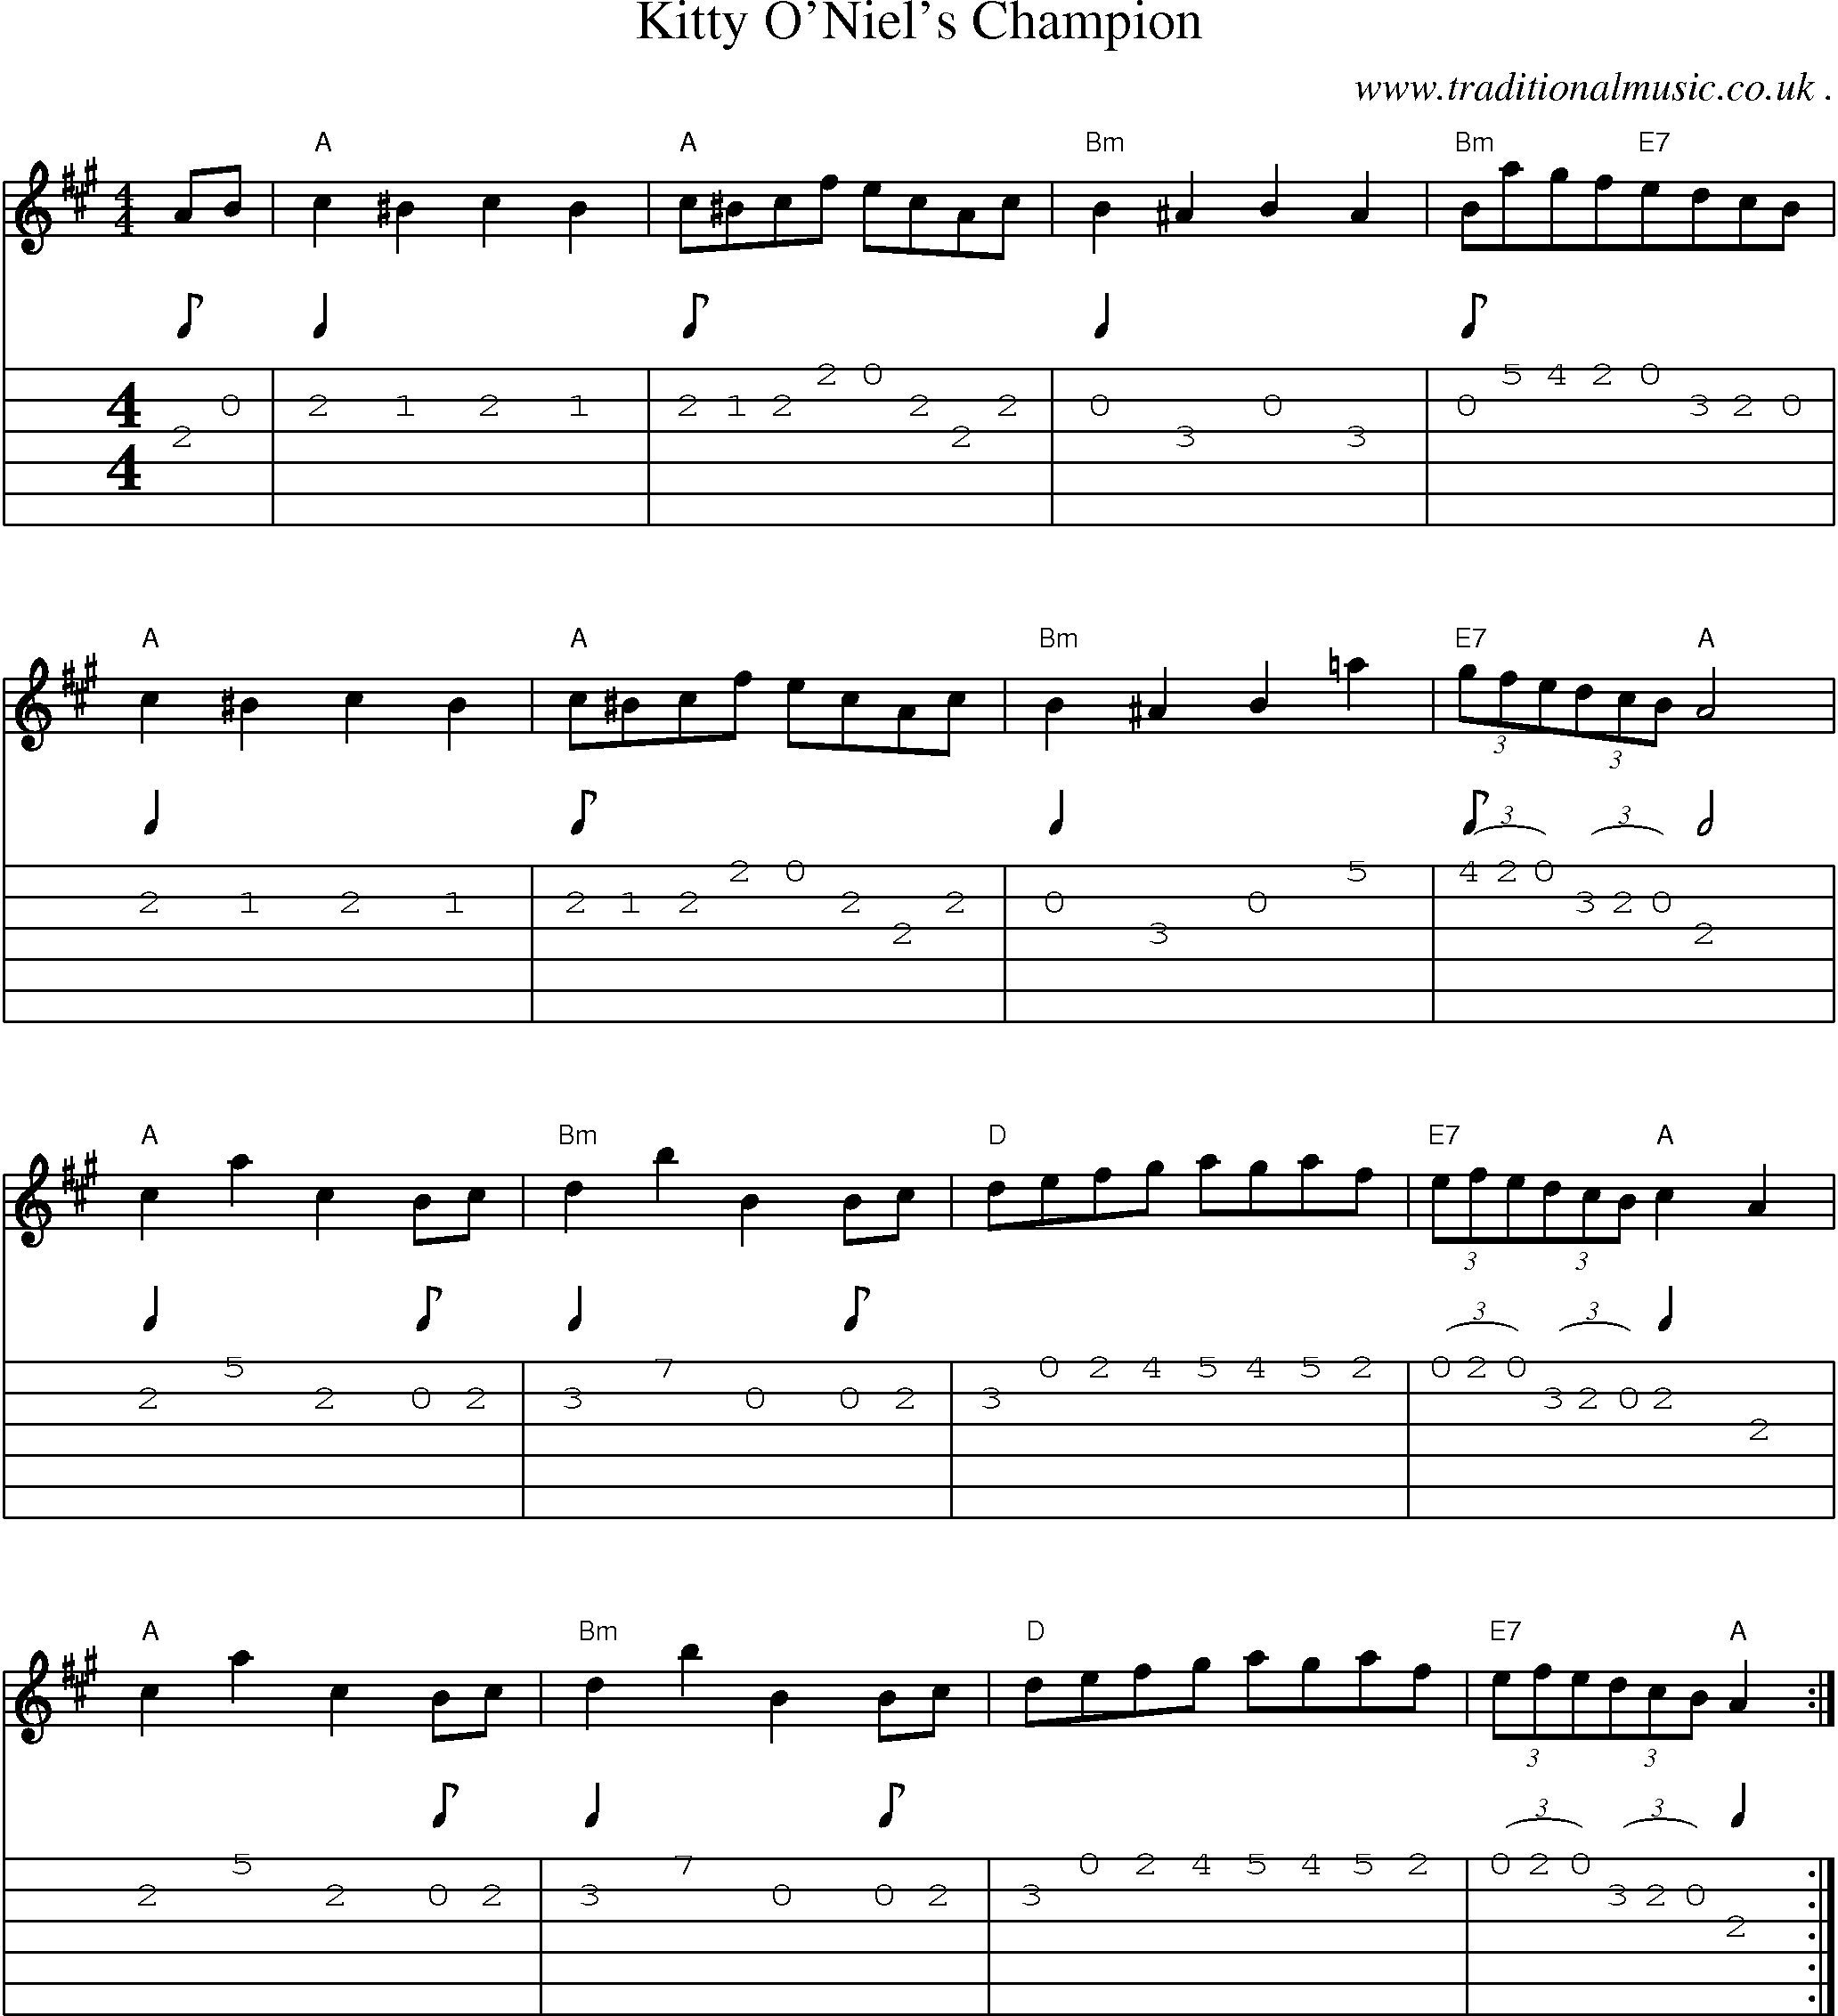 Sheet-Music and Guitar Tabs for Kitty Oniels Champion